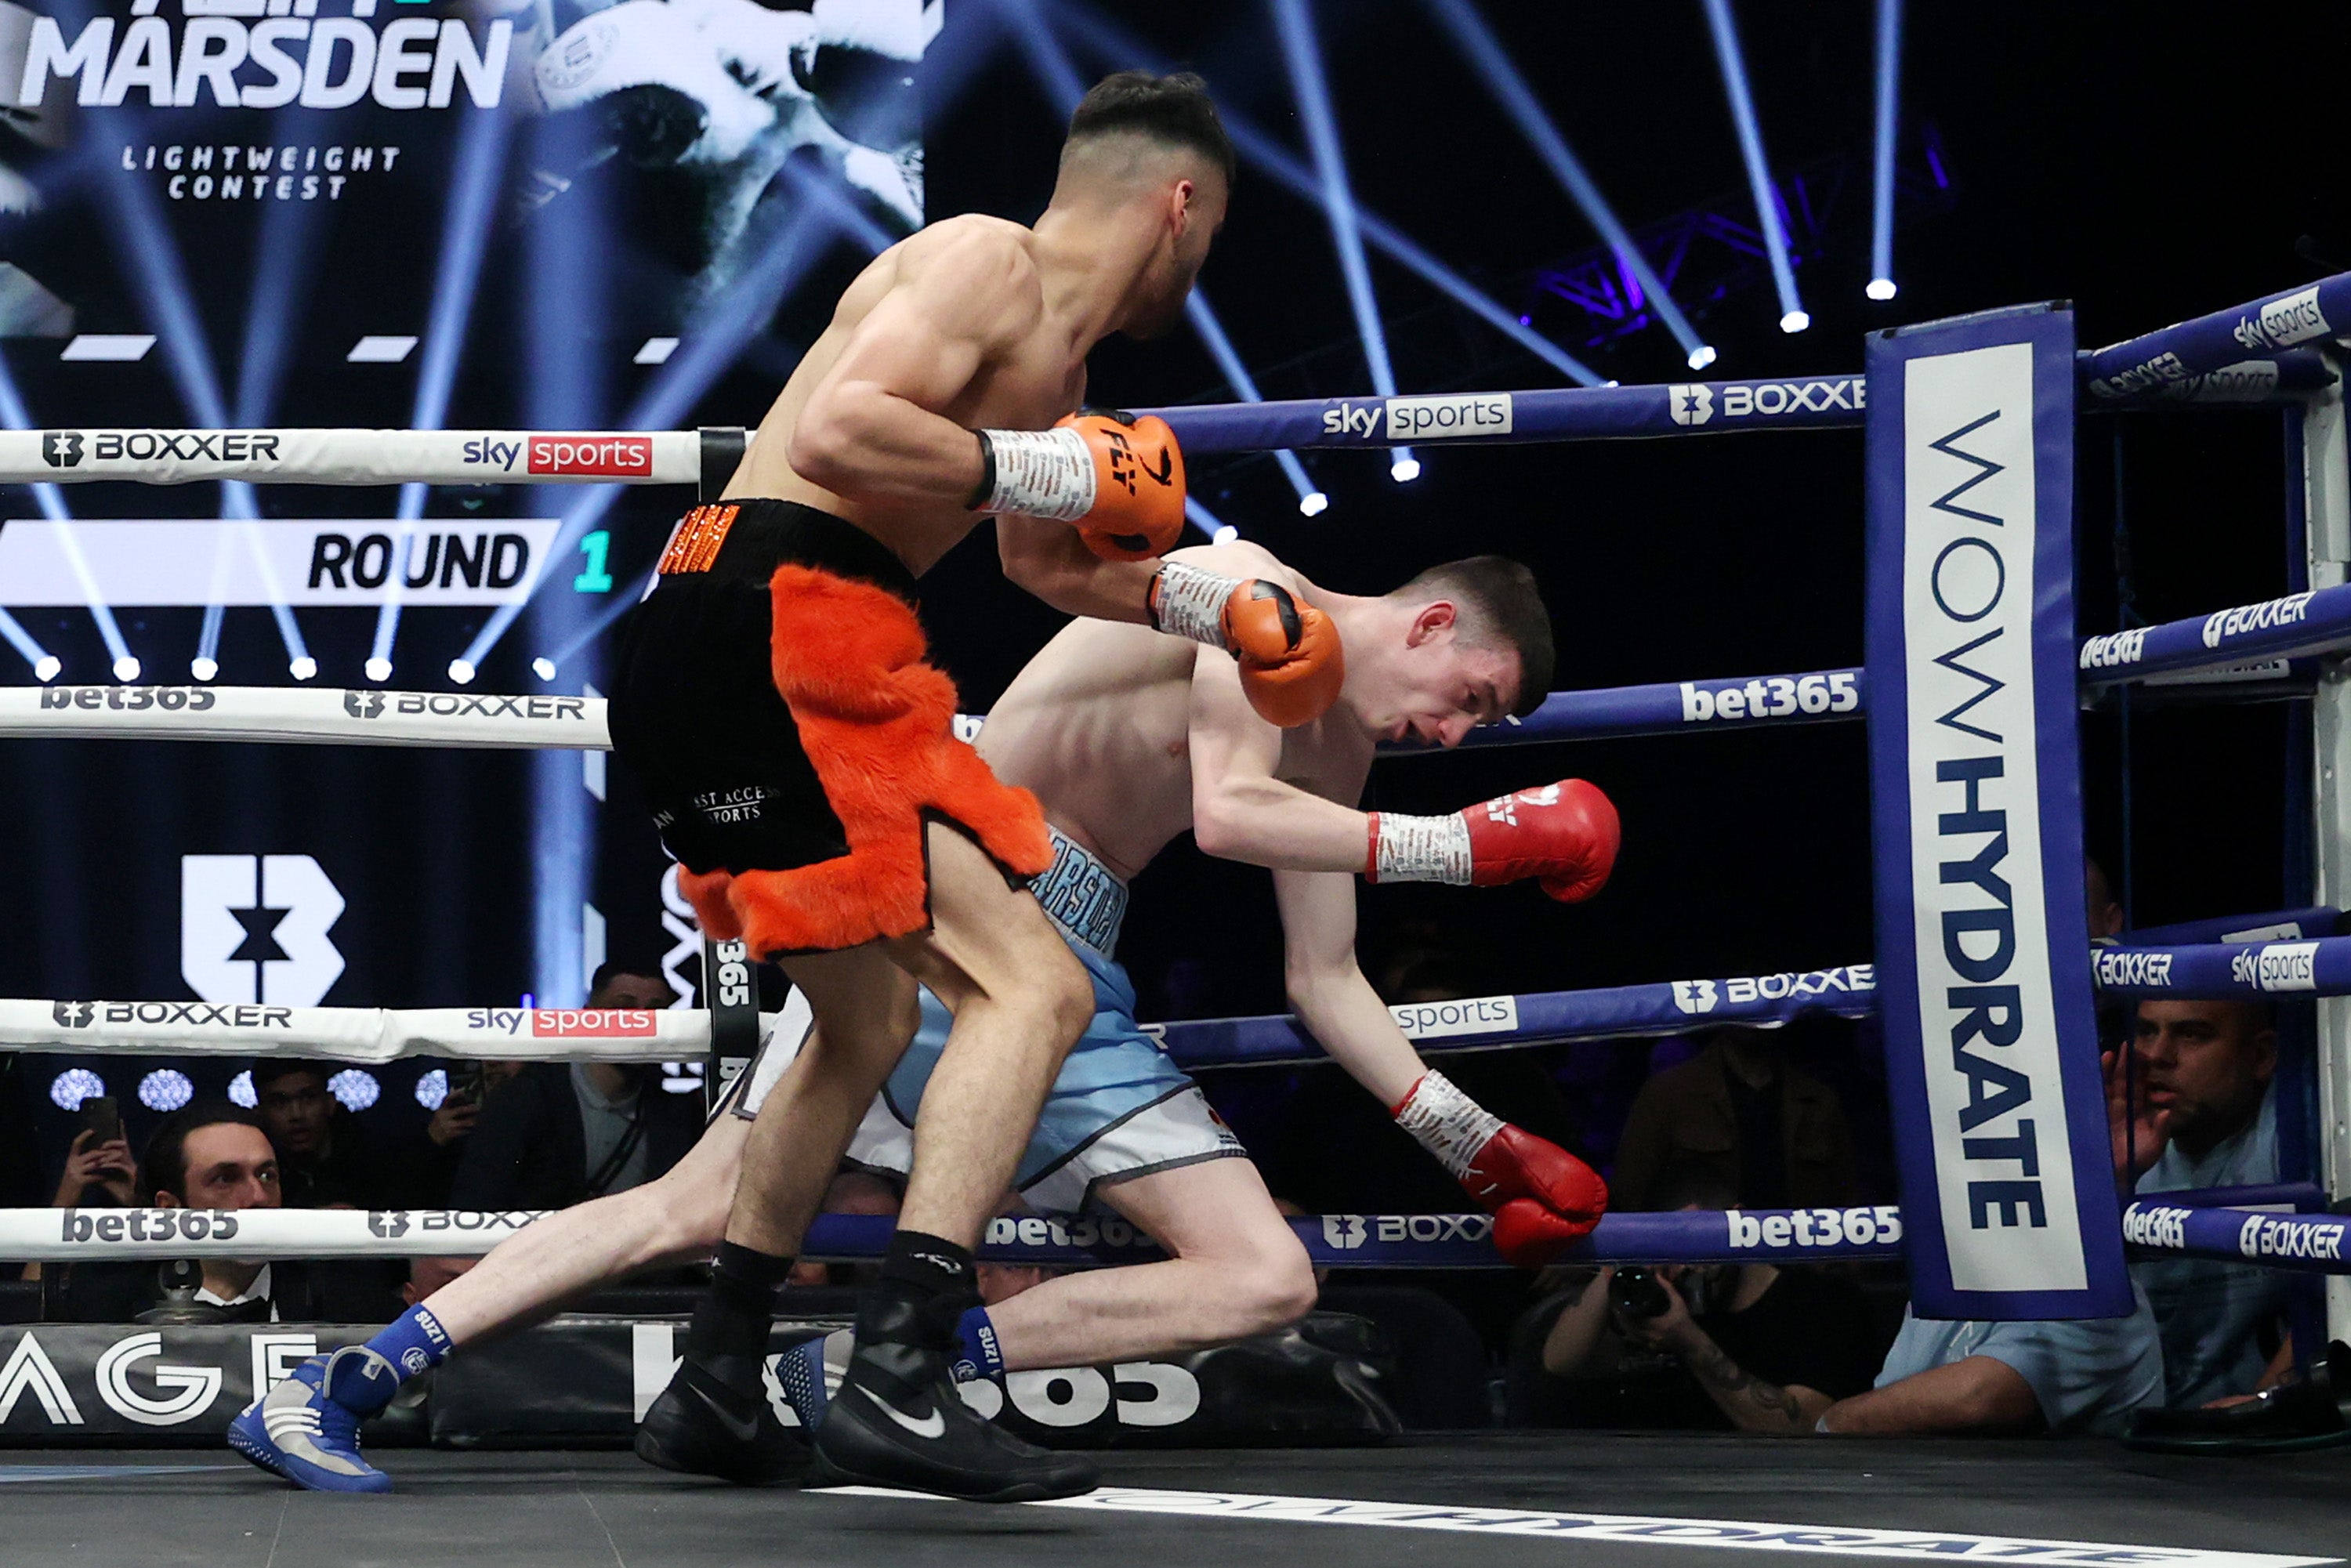 Azim stopped Connor Marsden in the first round in March 2022